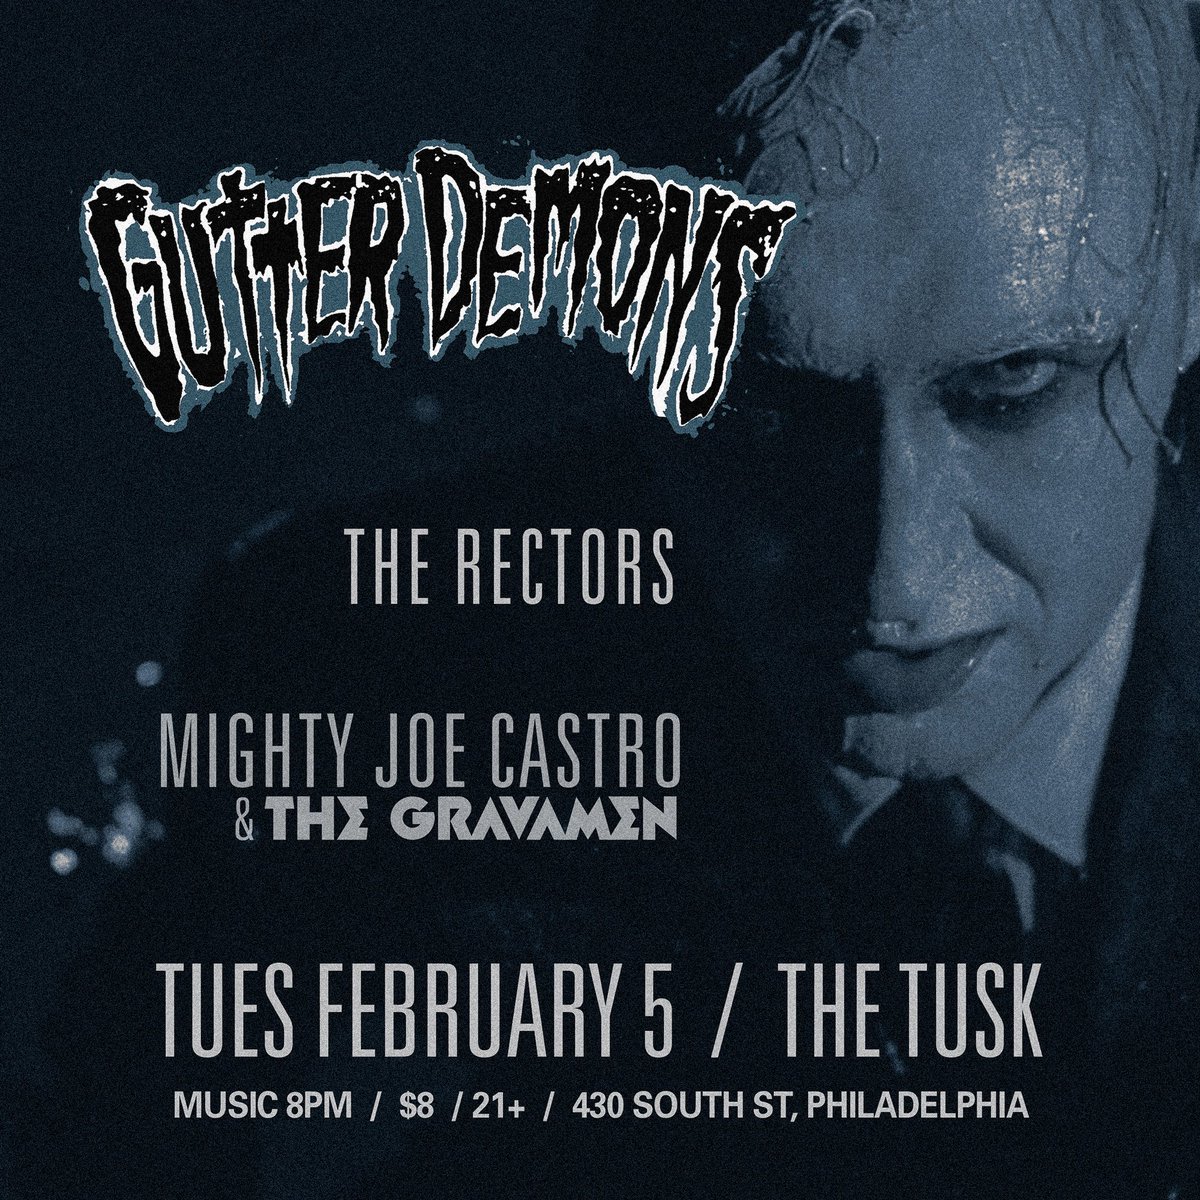 Philly: Come have more fun on a Tuesday night then you’ve had in years with us, The Rectors and then Gutter Demons. We’re on first at 8:30 sharp. It’s gonna be epic.
.
.
#rockabilly #psychobilly #mightyjoecastro #thegravamen #gutterdemons #thetusk #rocknroll